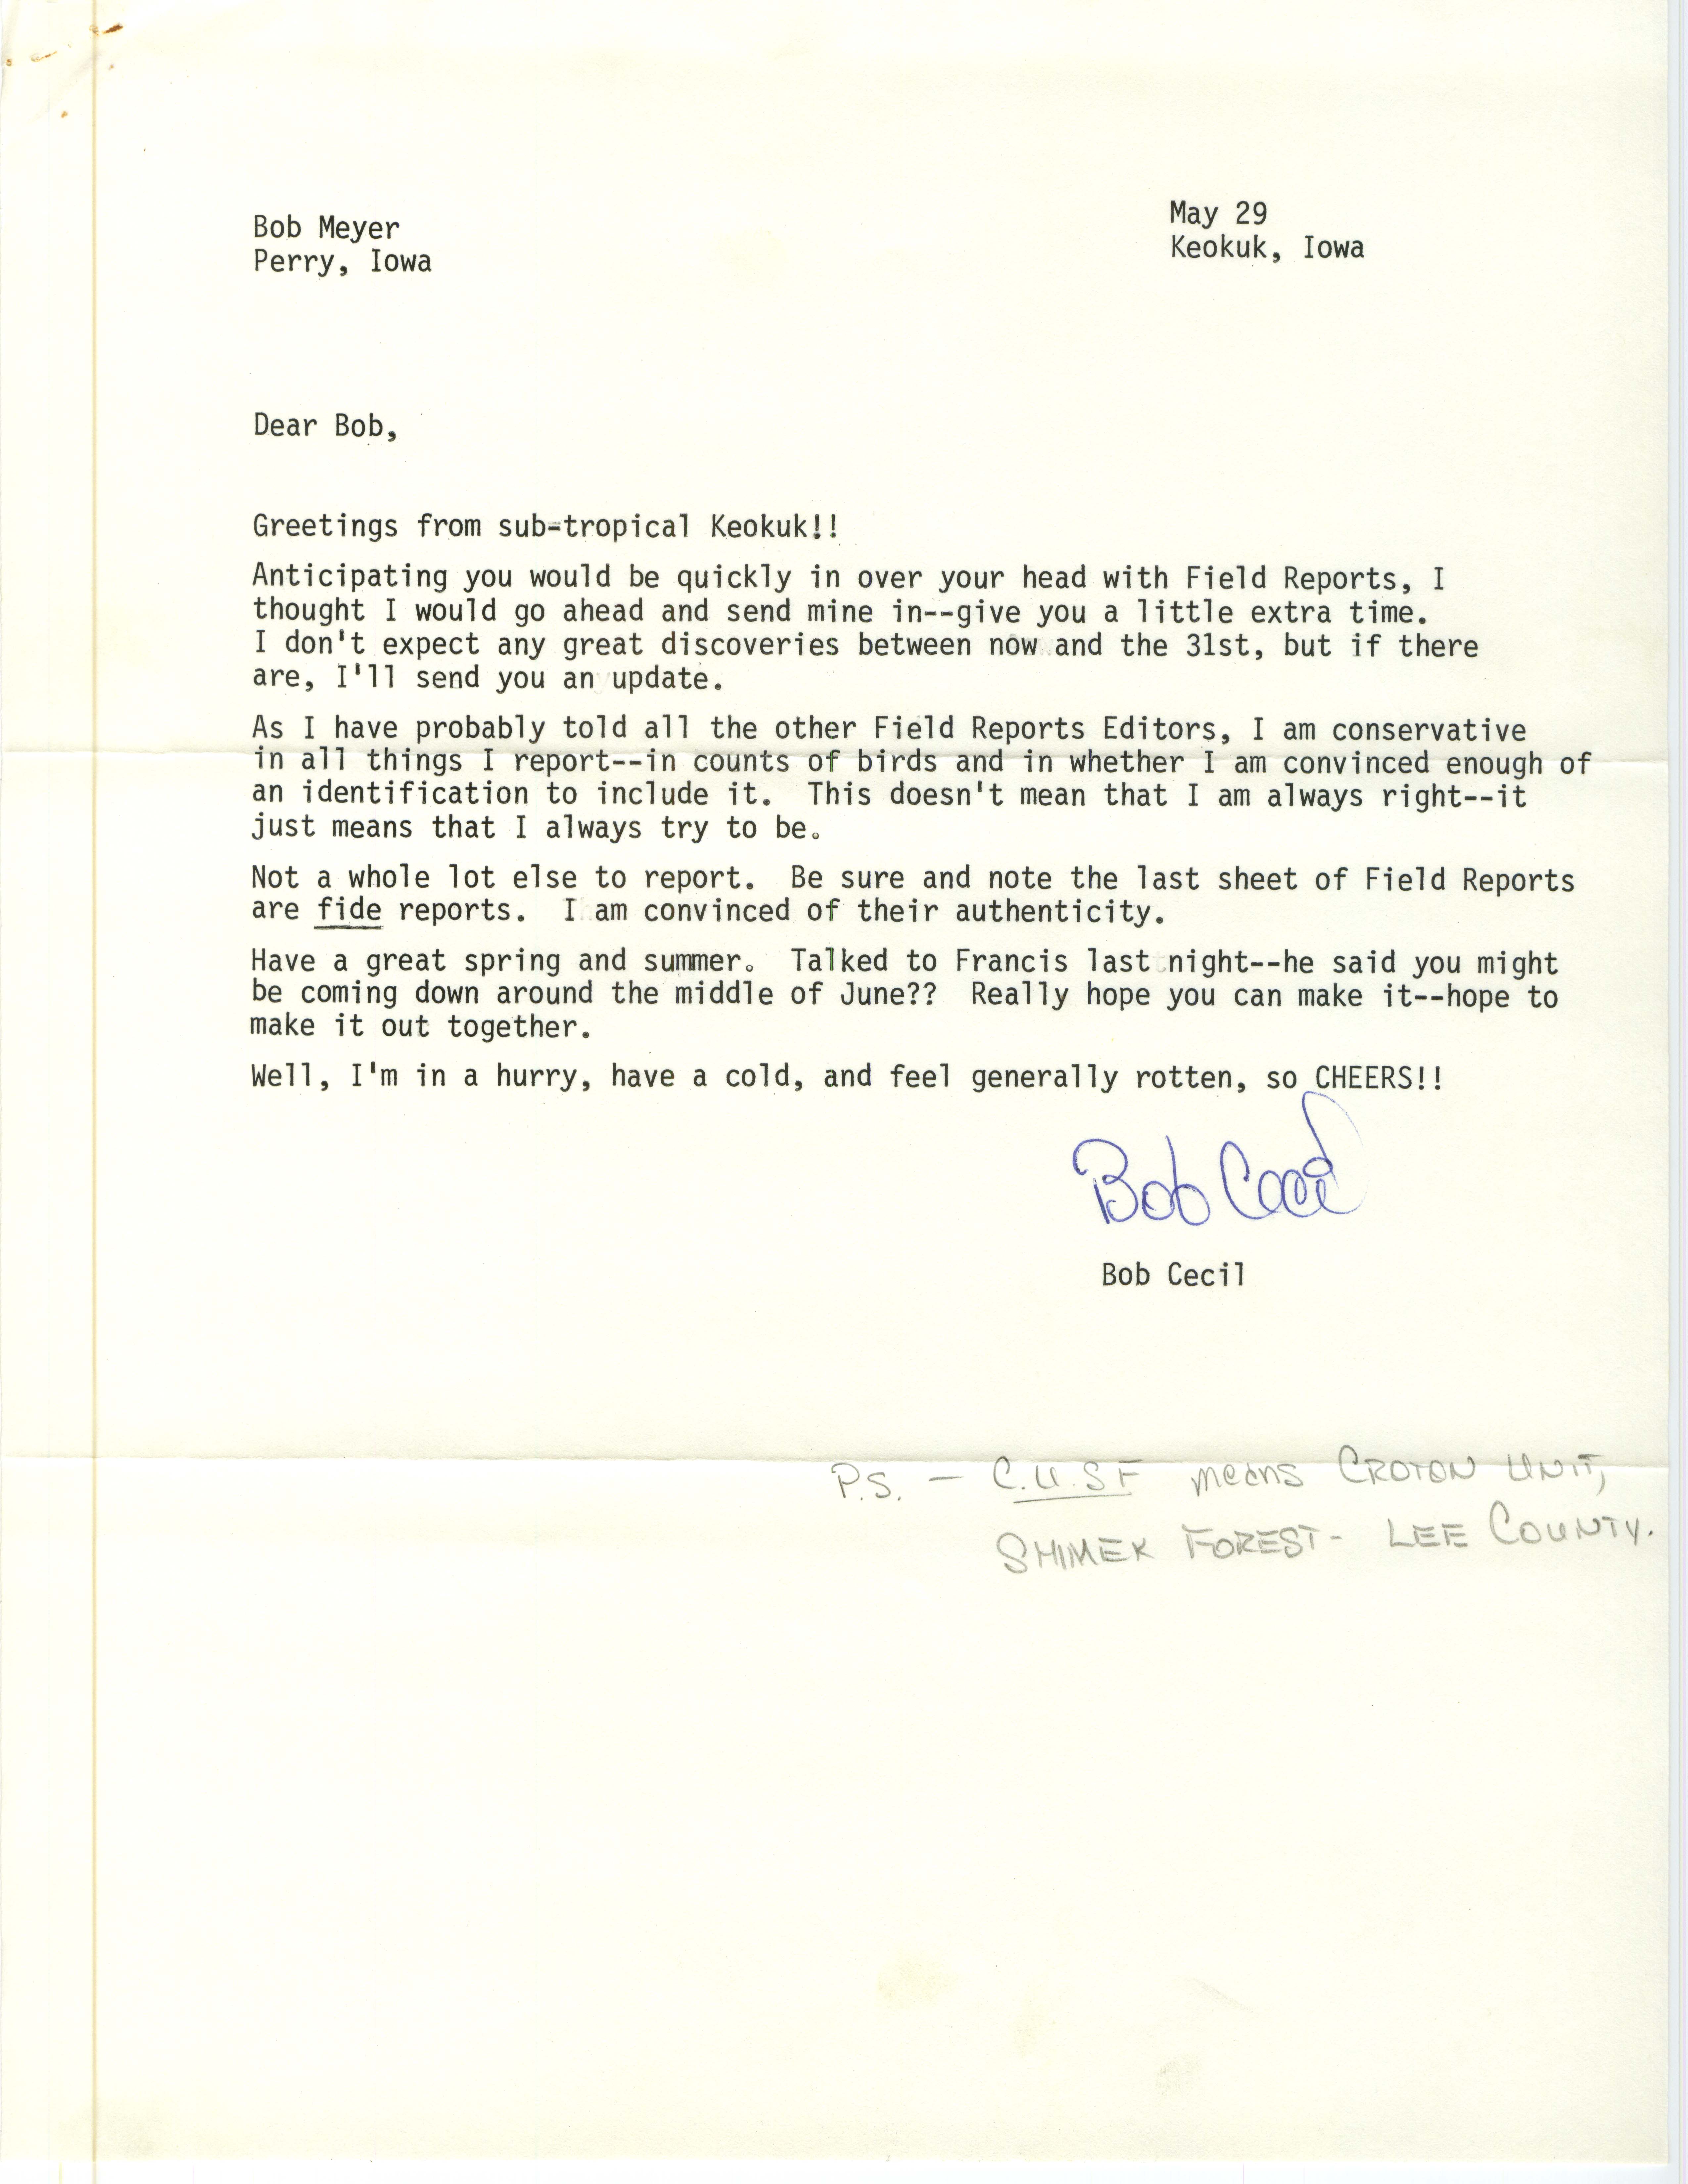 Robert Cecil letter to Robert Myers regarding Spring Field Report, May 29, 1986